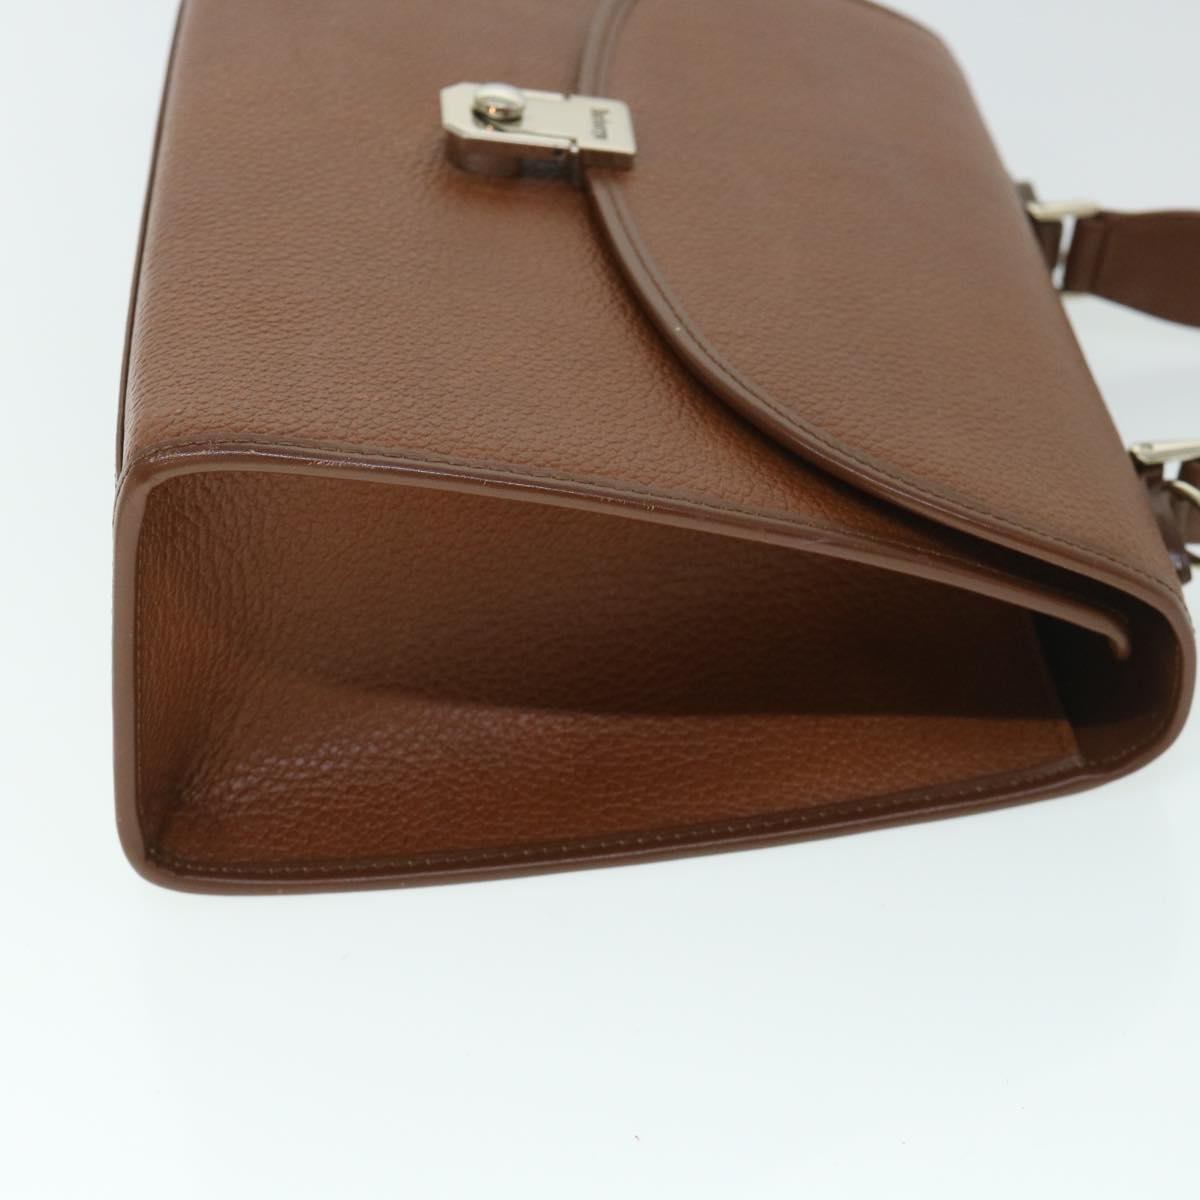 Burberrys Hand Bag Leather 2way Brown Auth th4046